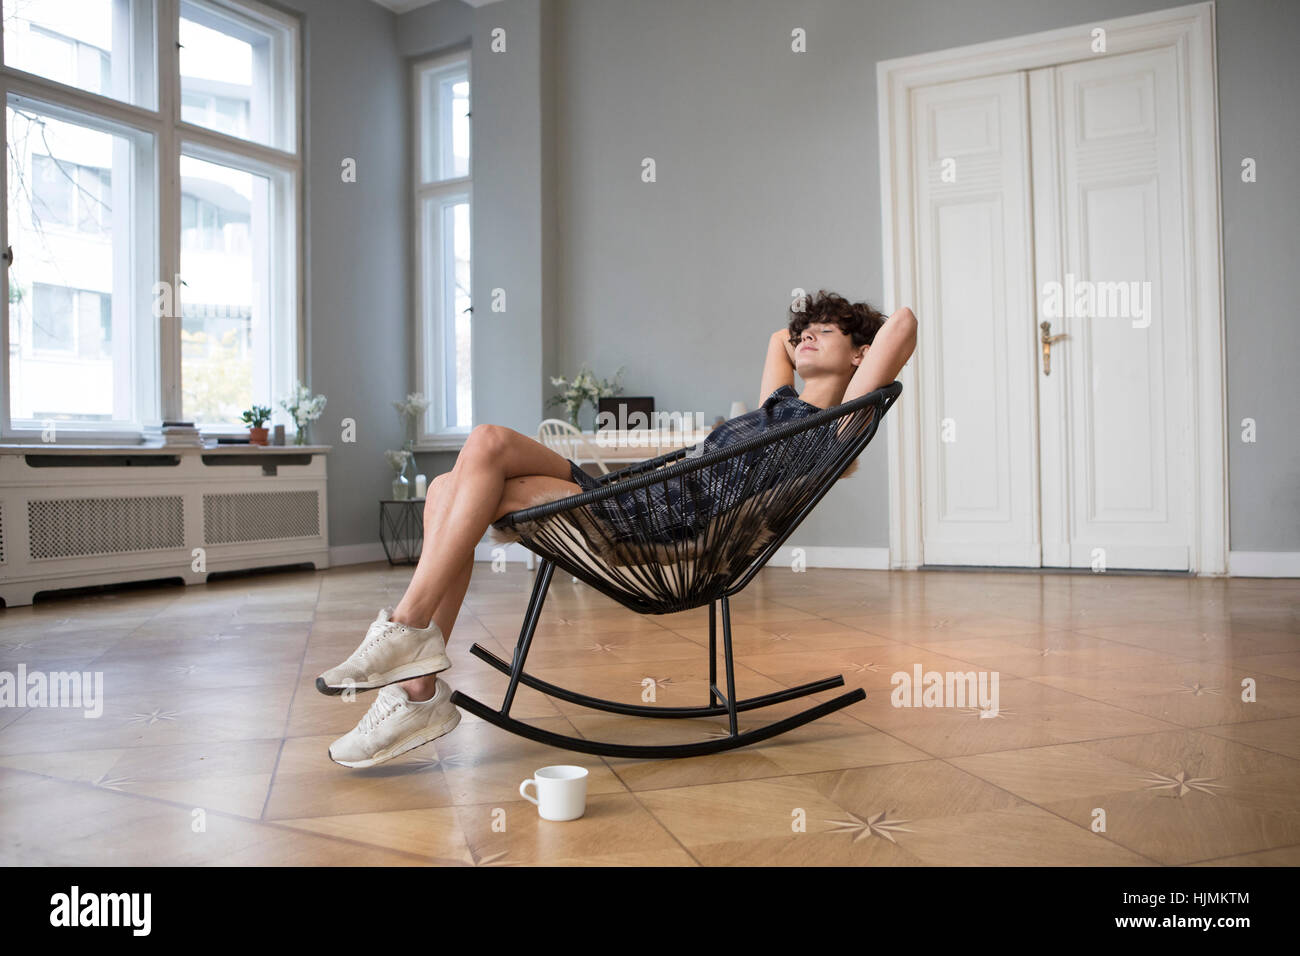 Young woman relaxing on rocking chair at home Banque D'Images